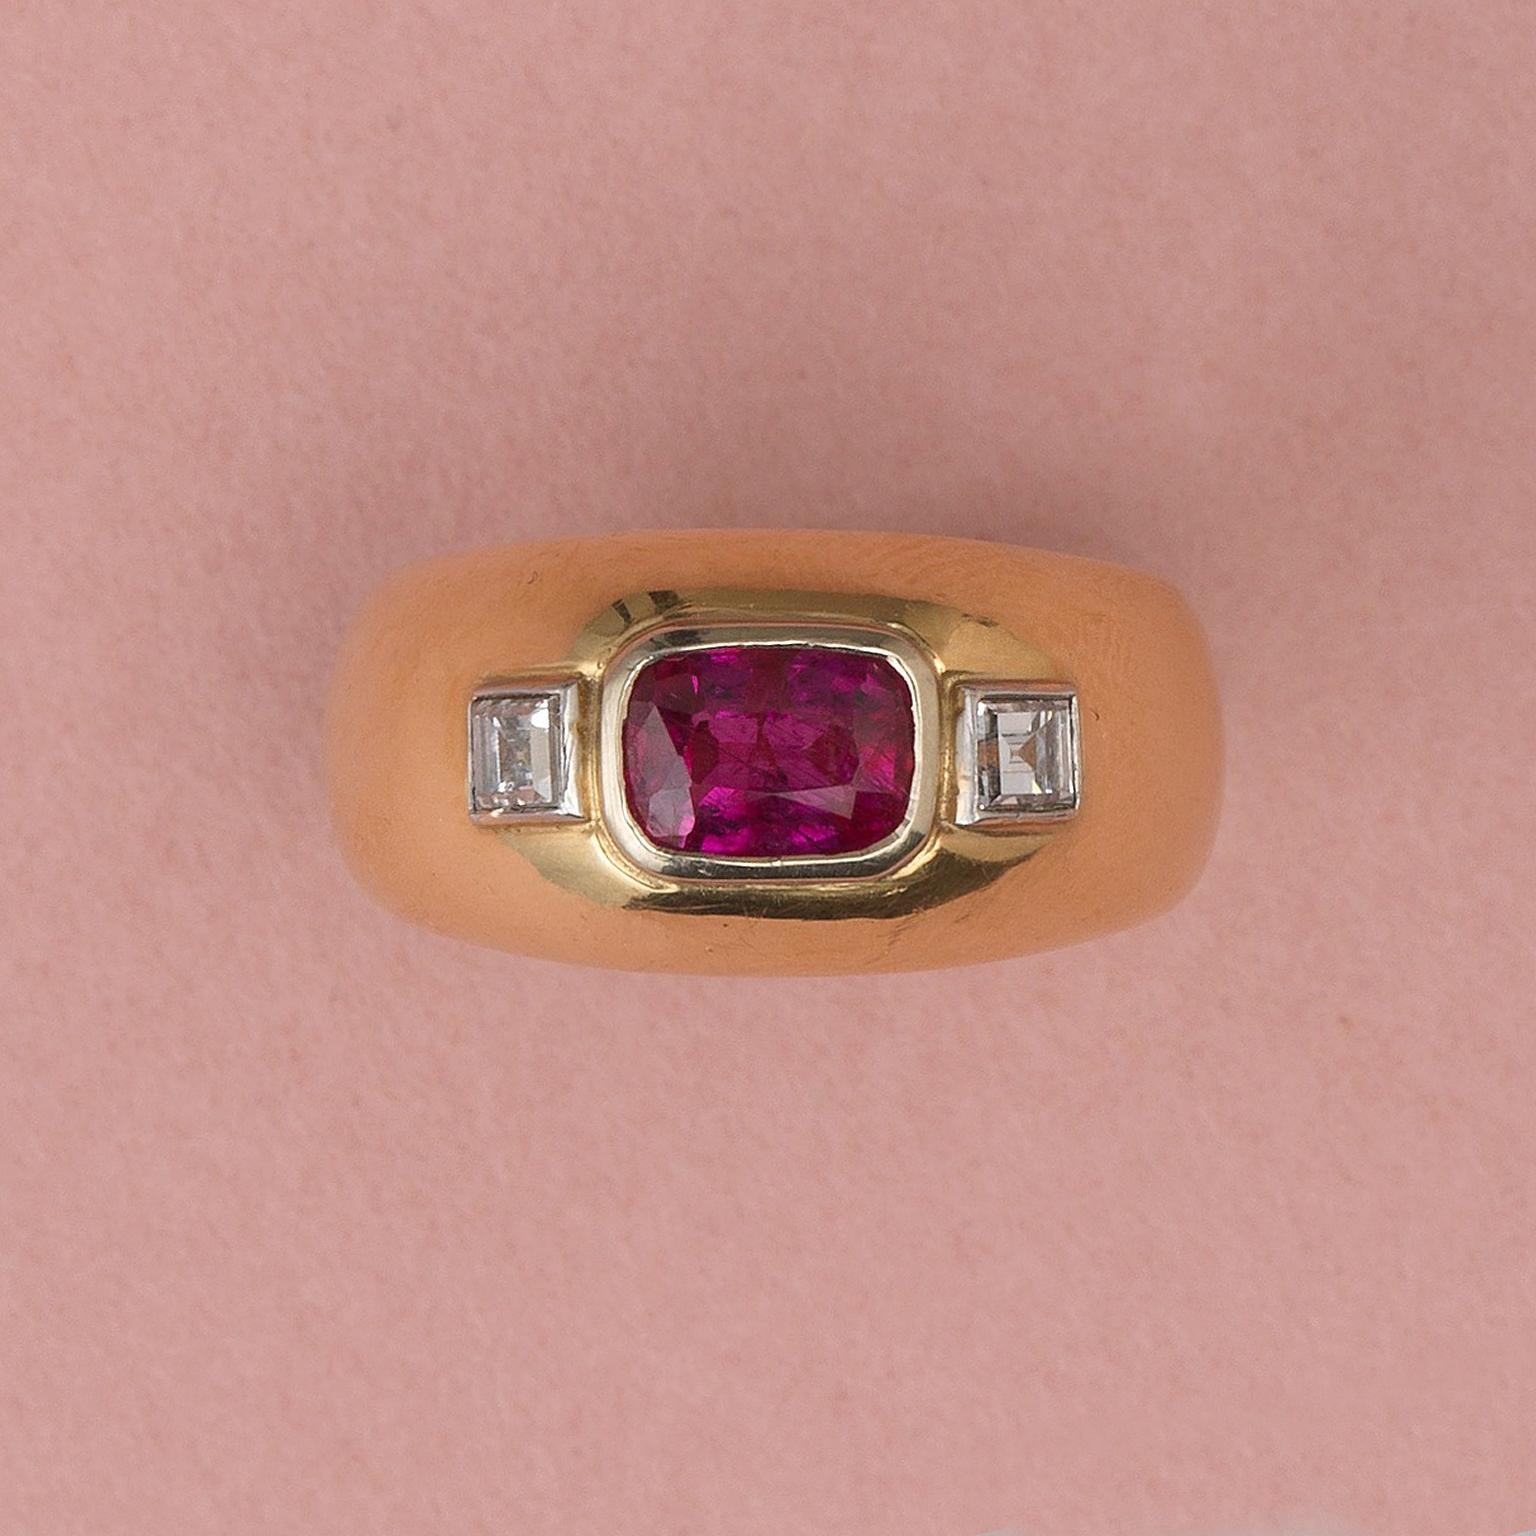 A beautiful, solid 18 carat yellow gold ring flush and vertically set with a table cut strong purplish-red ruby (unheated circa 1.68 carat Thailand origin) on each side is a carré cut diamond in a white gold mounting (circa 0.28 carat total),